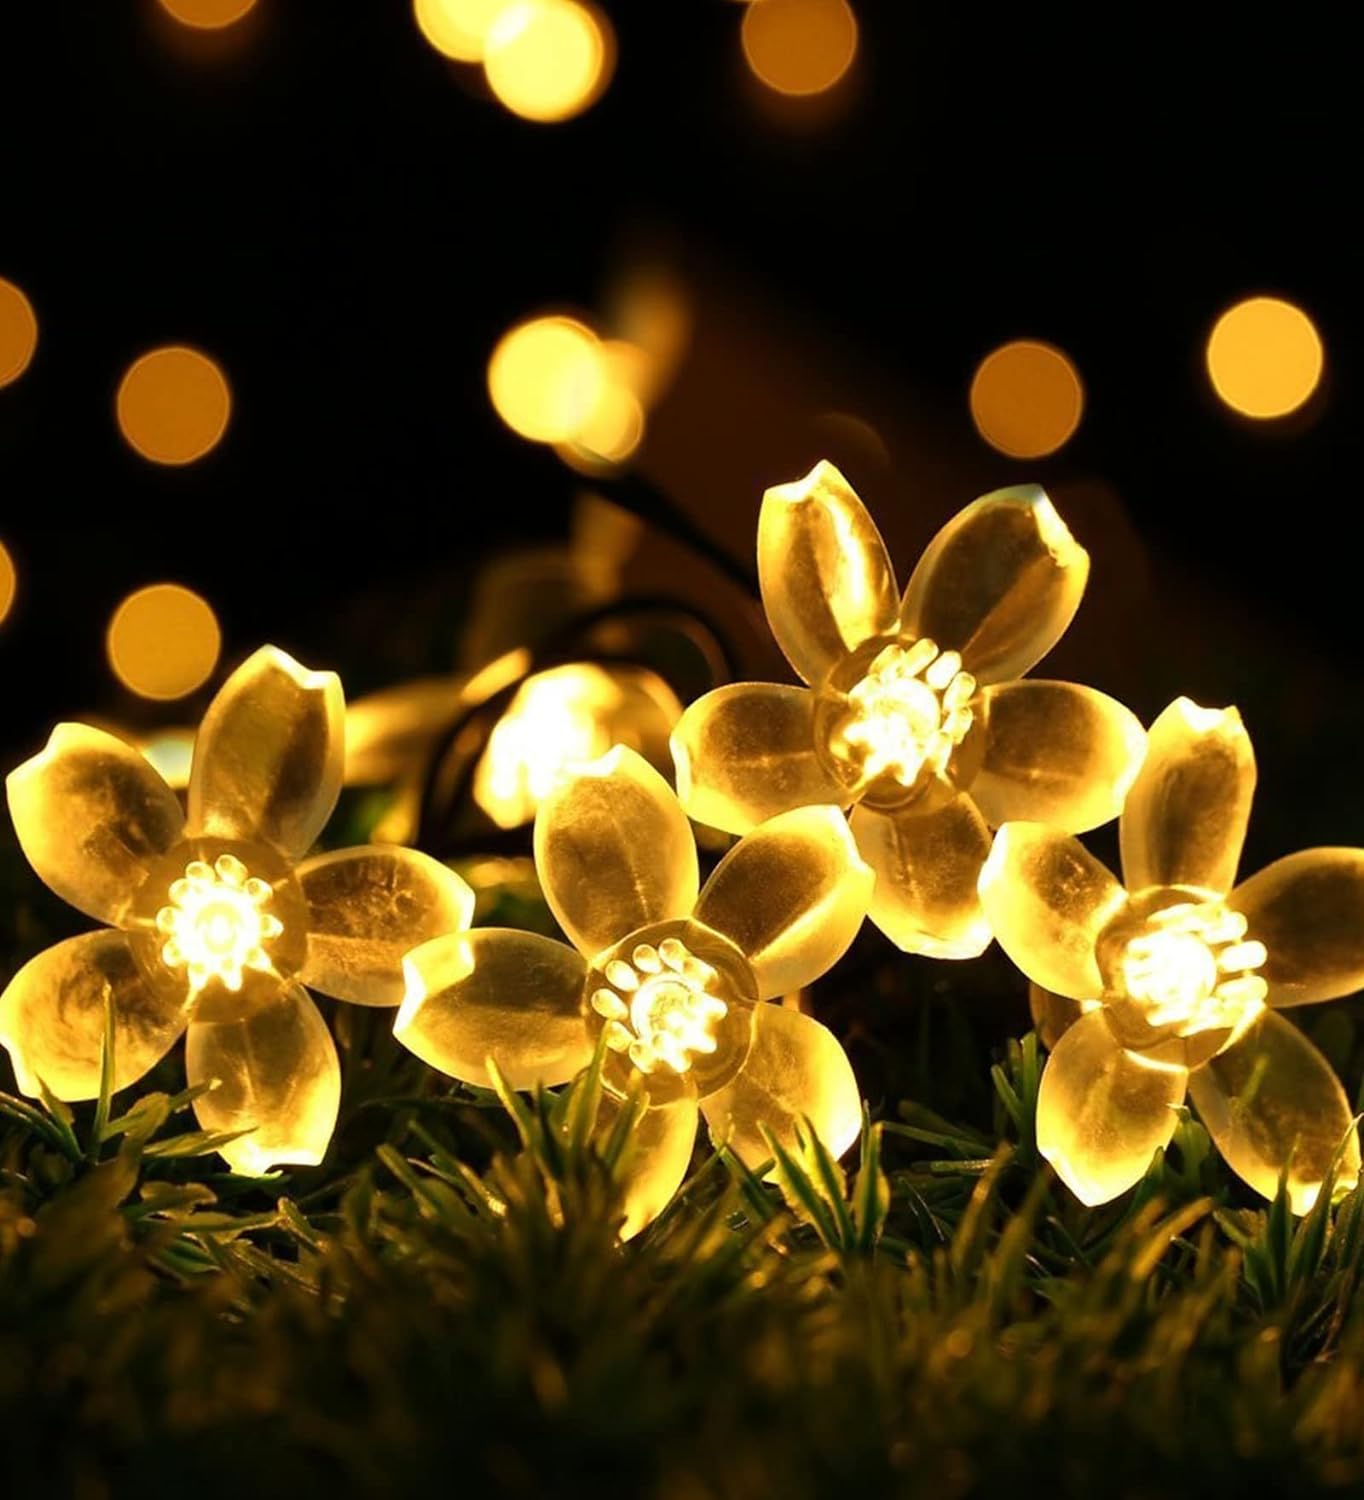 Yellow flowers glowing in darkness, creating a beautiful contrast of colors.